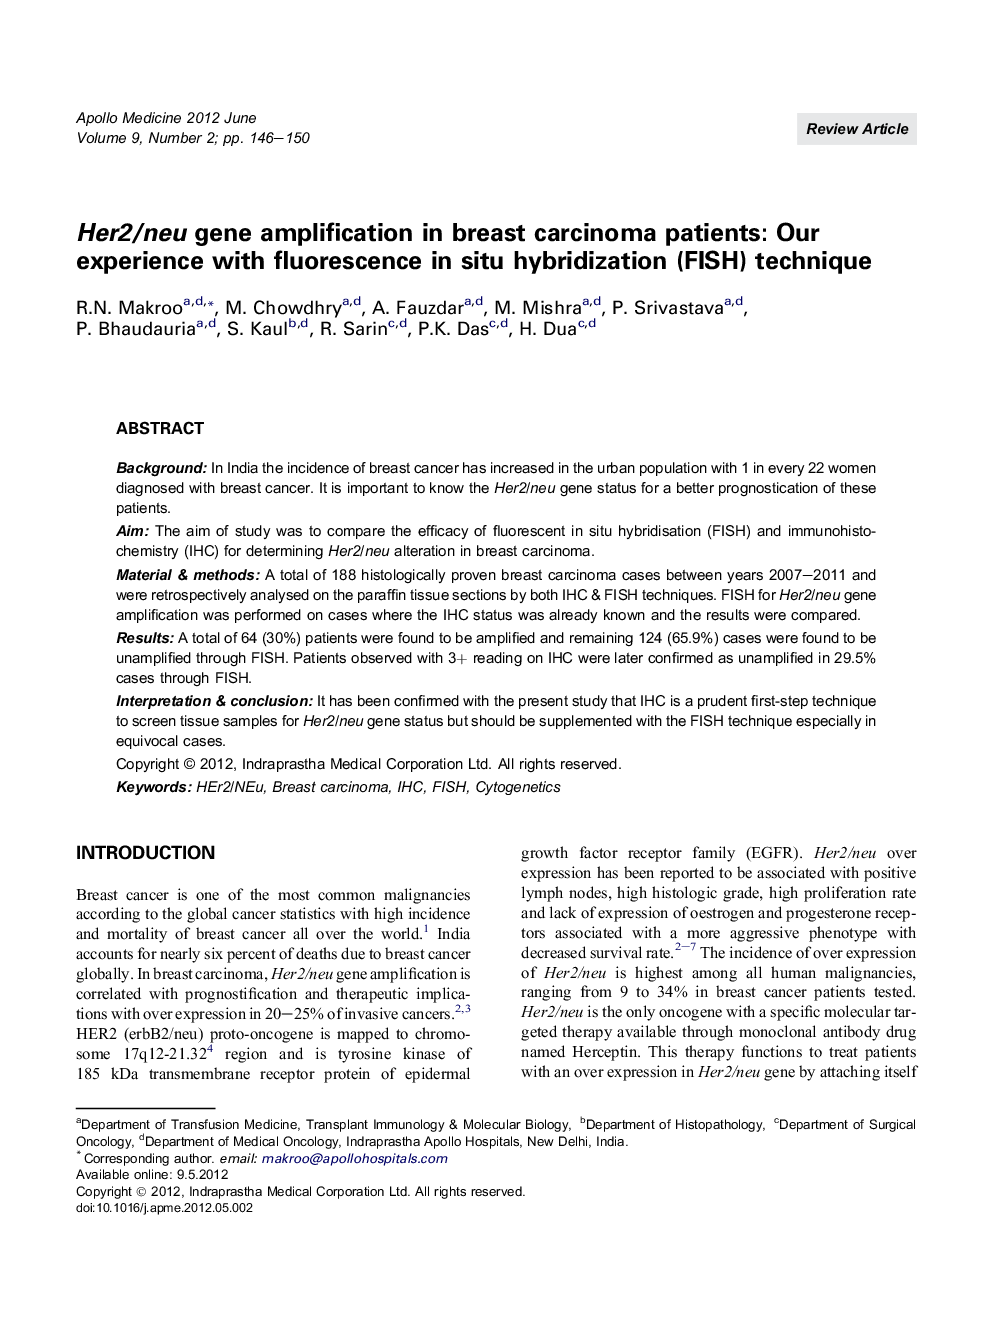 Her2/neu gene amplification in breast carcinoma patients: Our experience with fluorescence in situ hybridization (FISH) technique